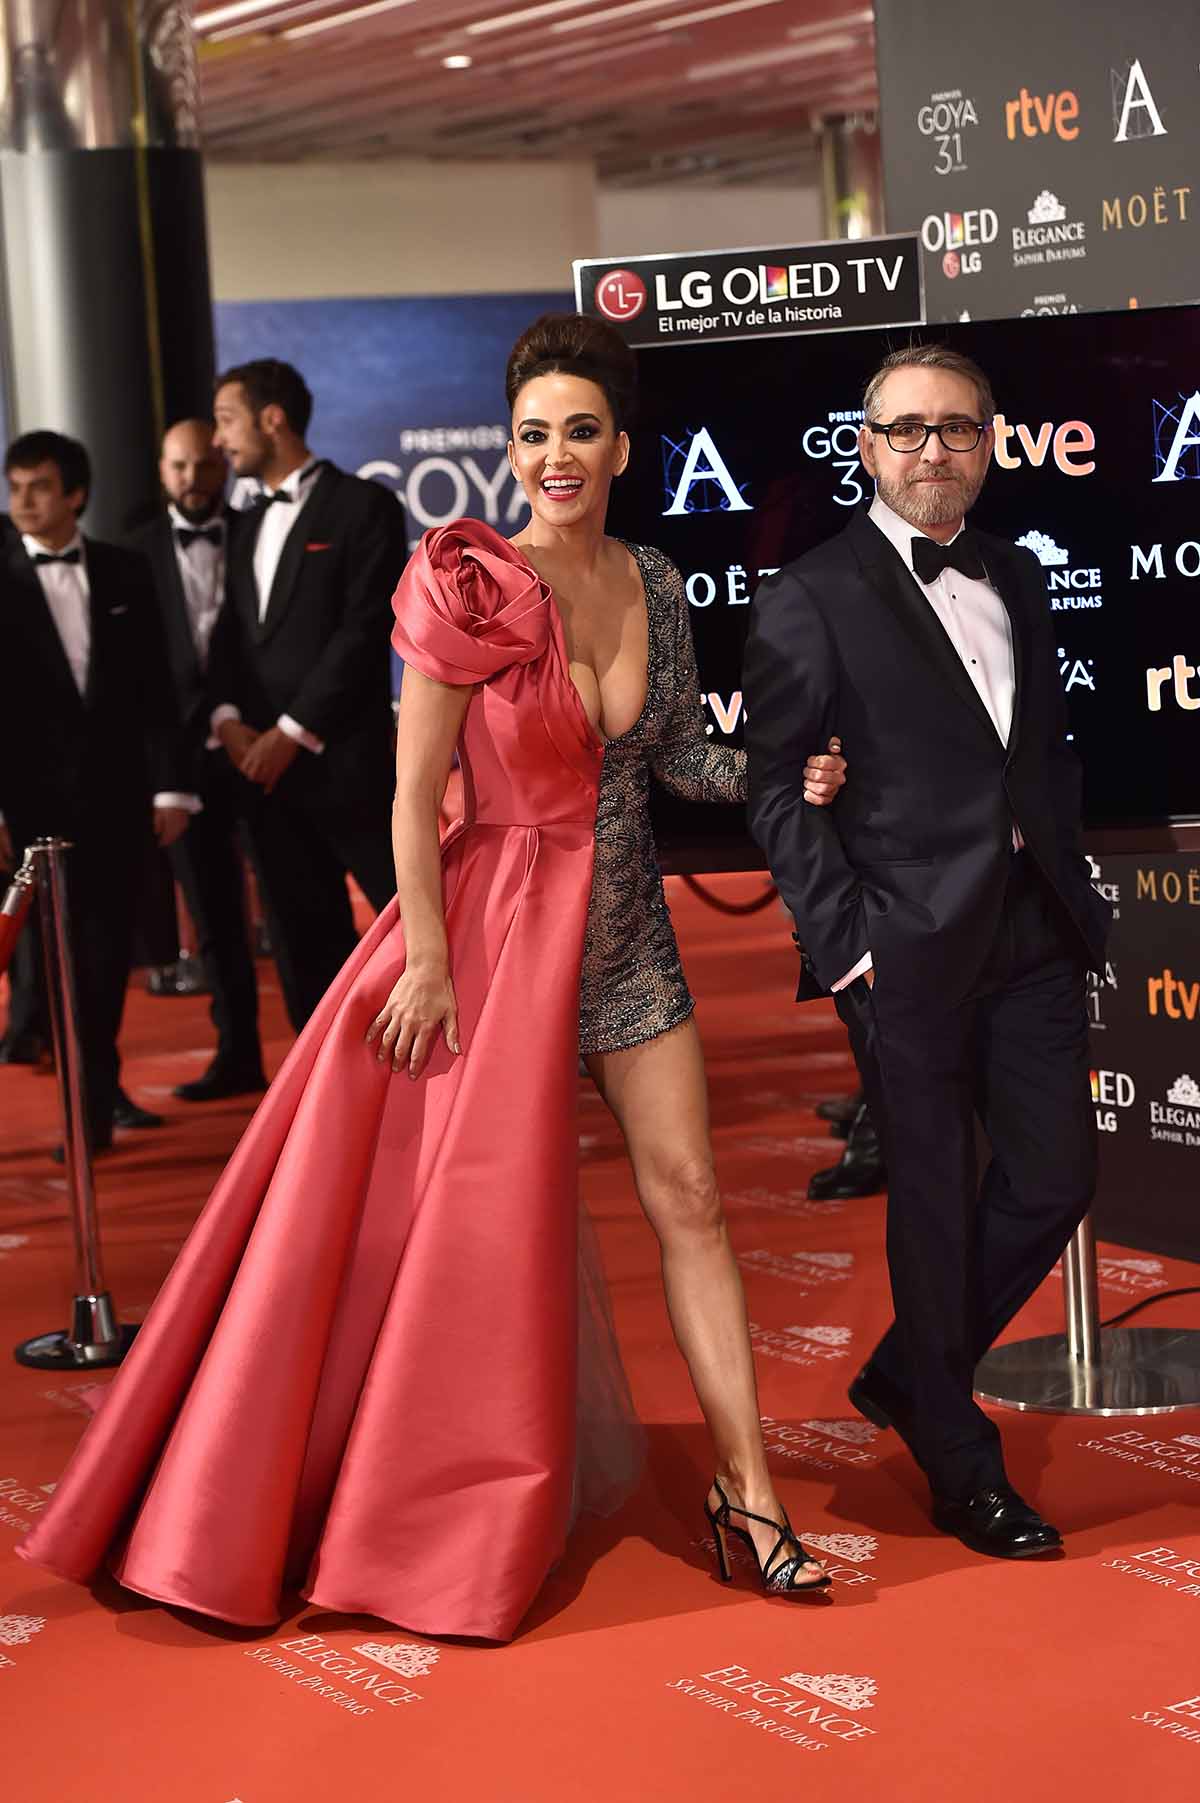 Presenter Cristina Rodriguez at photocall during the 31th annual Goya Film Awards in Madrid, on Saturday 4th February, 2017.